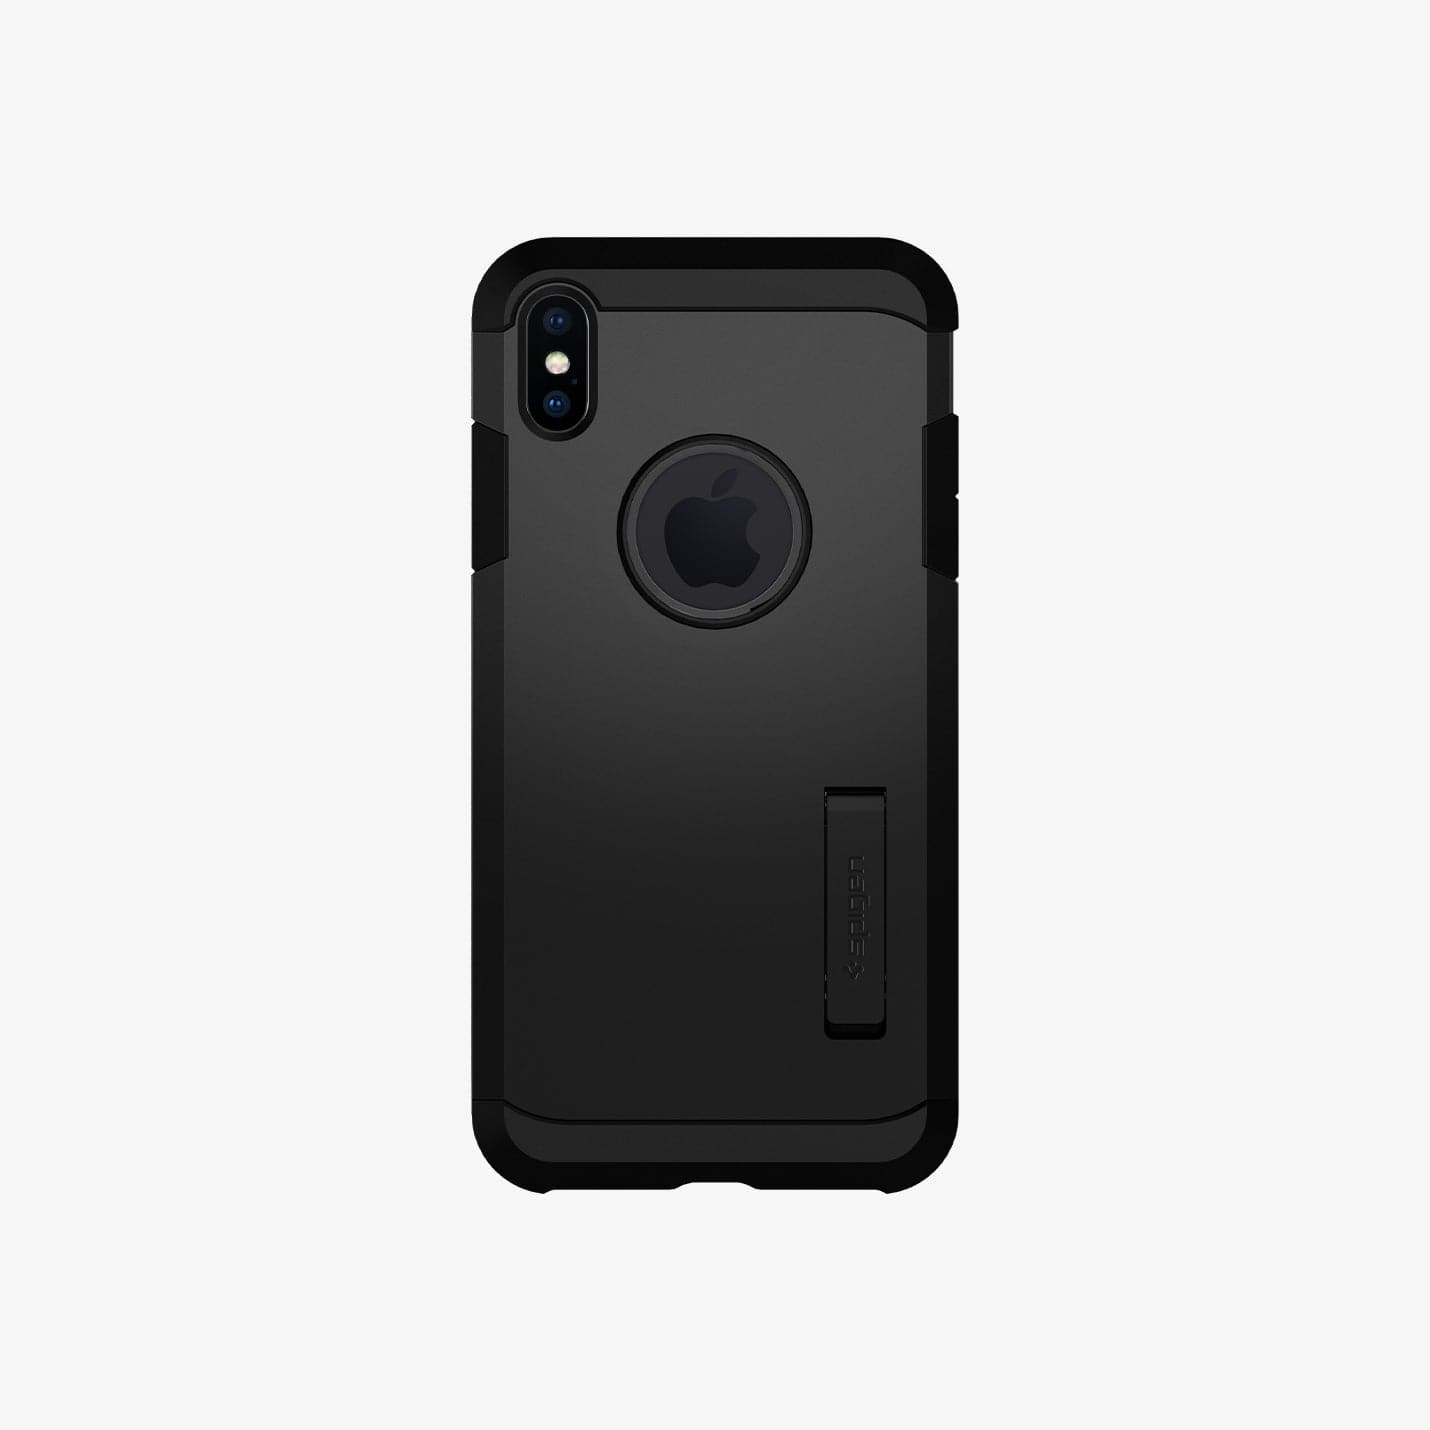 065CS25130 - iPhone XS Max Case Tough Armor in black showing the back